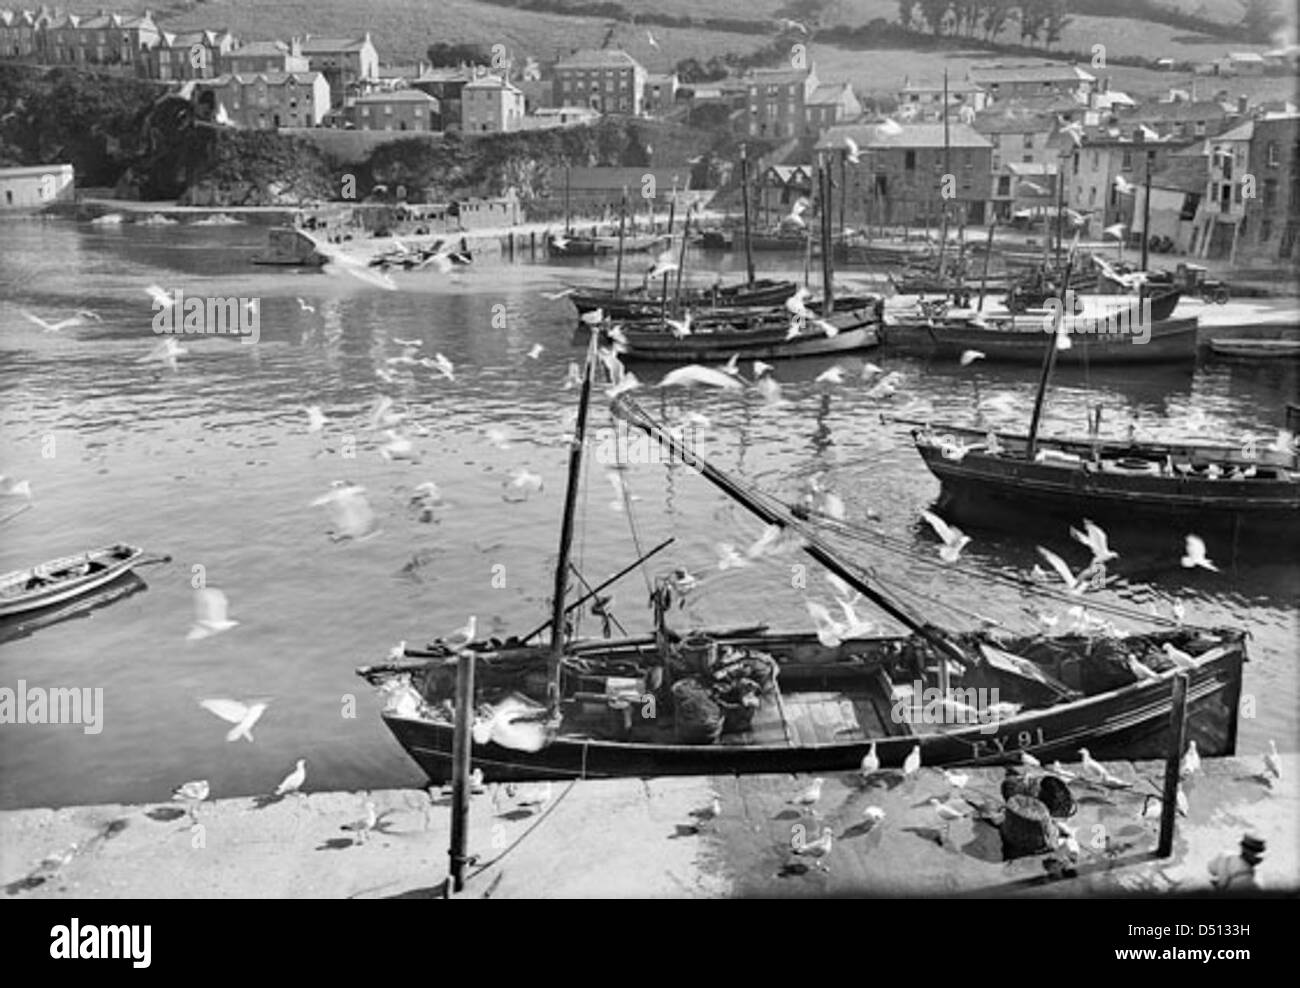 Harbour and flock of seagulls, Mevagissey, Cornwall Stock Photo